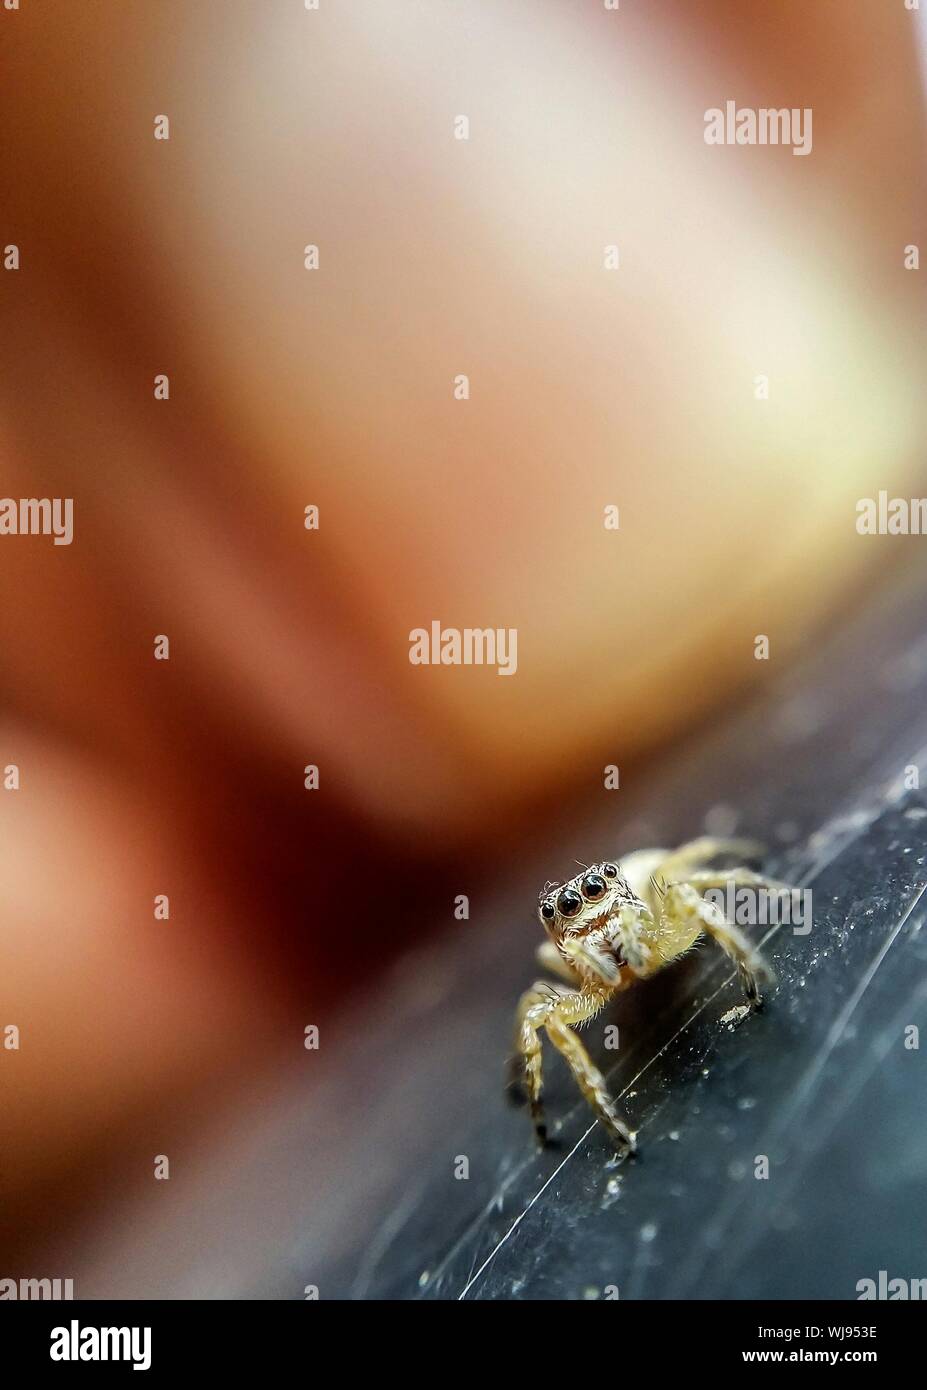 Tilt Image Of Jumping Spider On Table Stock Photo